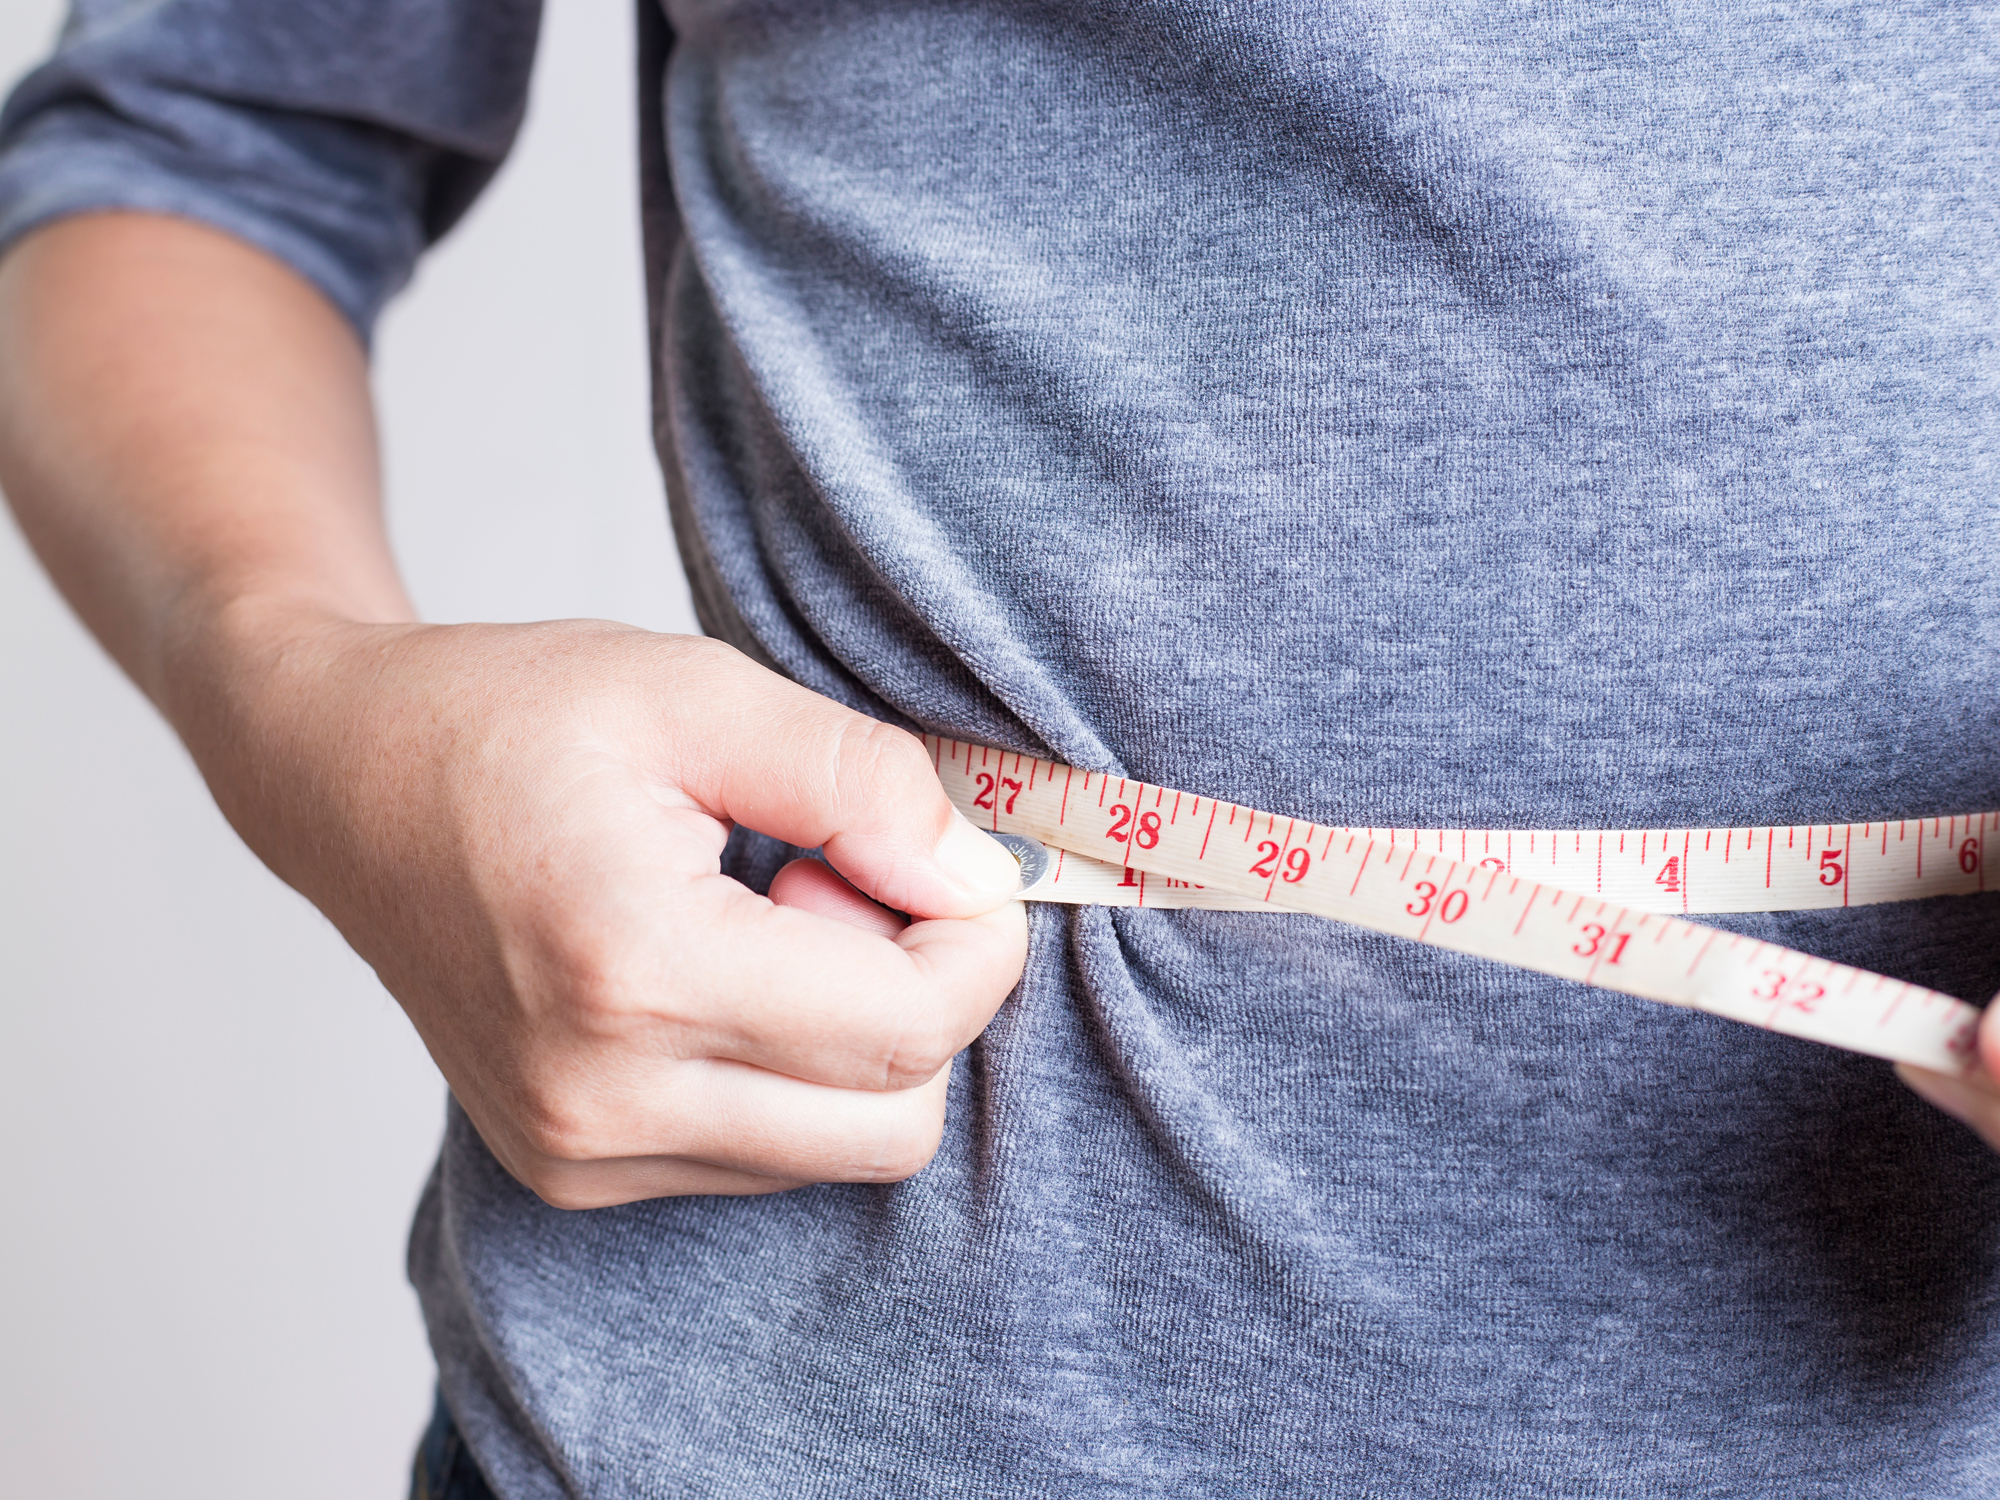 5 ways to get past a weight loss plateau